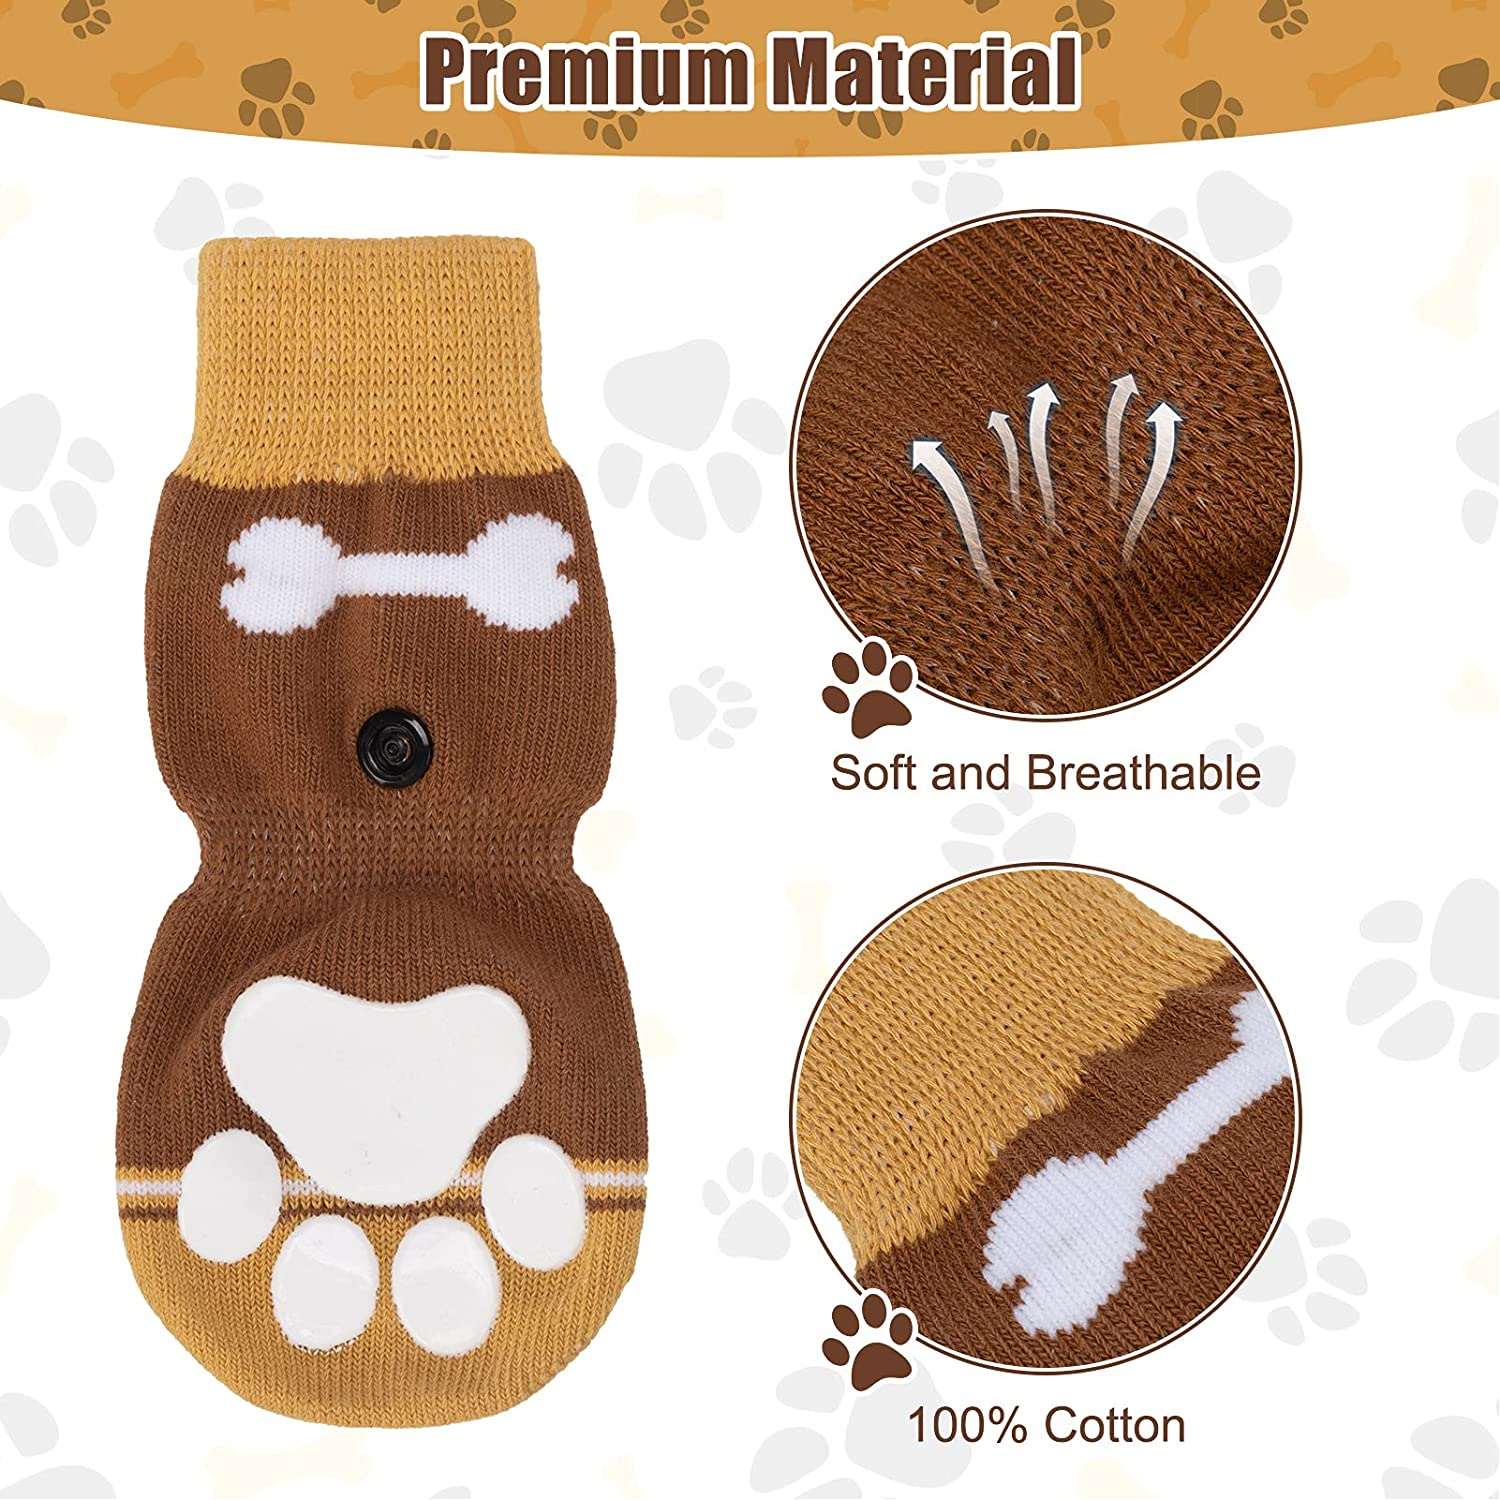 KUTKUT Anti-Slip Knit Socks with Bone Embroidery Pattern for Medium, Large Dogs |Traction Control Non-Slip Pet Paw Protectors with Grips for Big Dogs | Soft Comfortable. - kutkutstyle